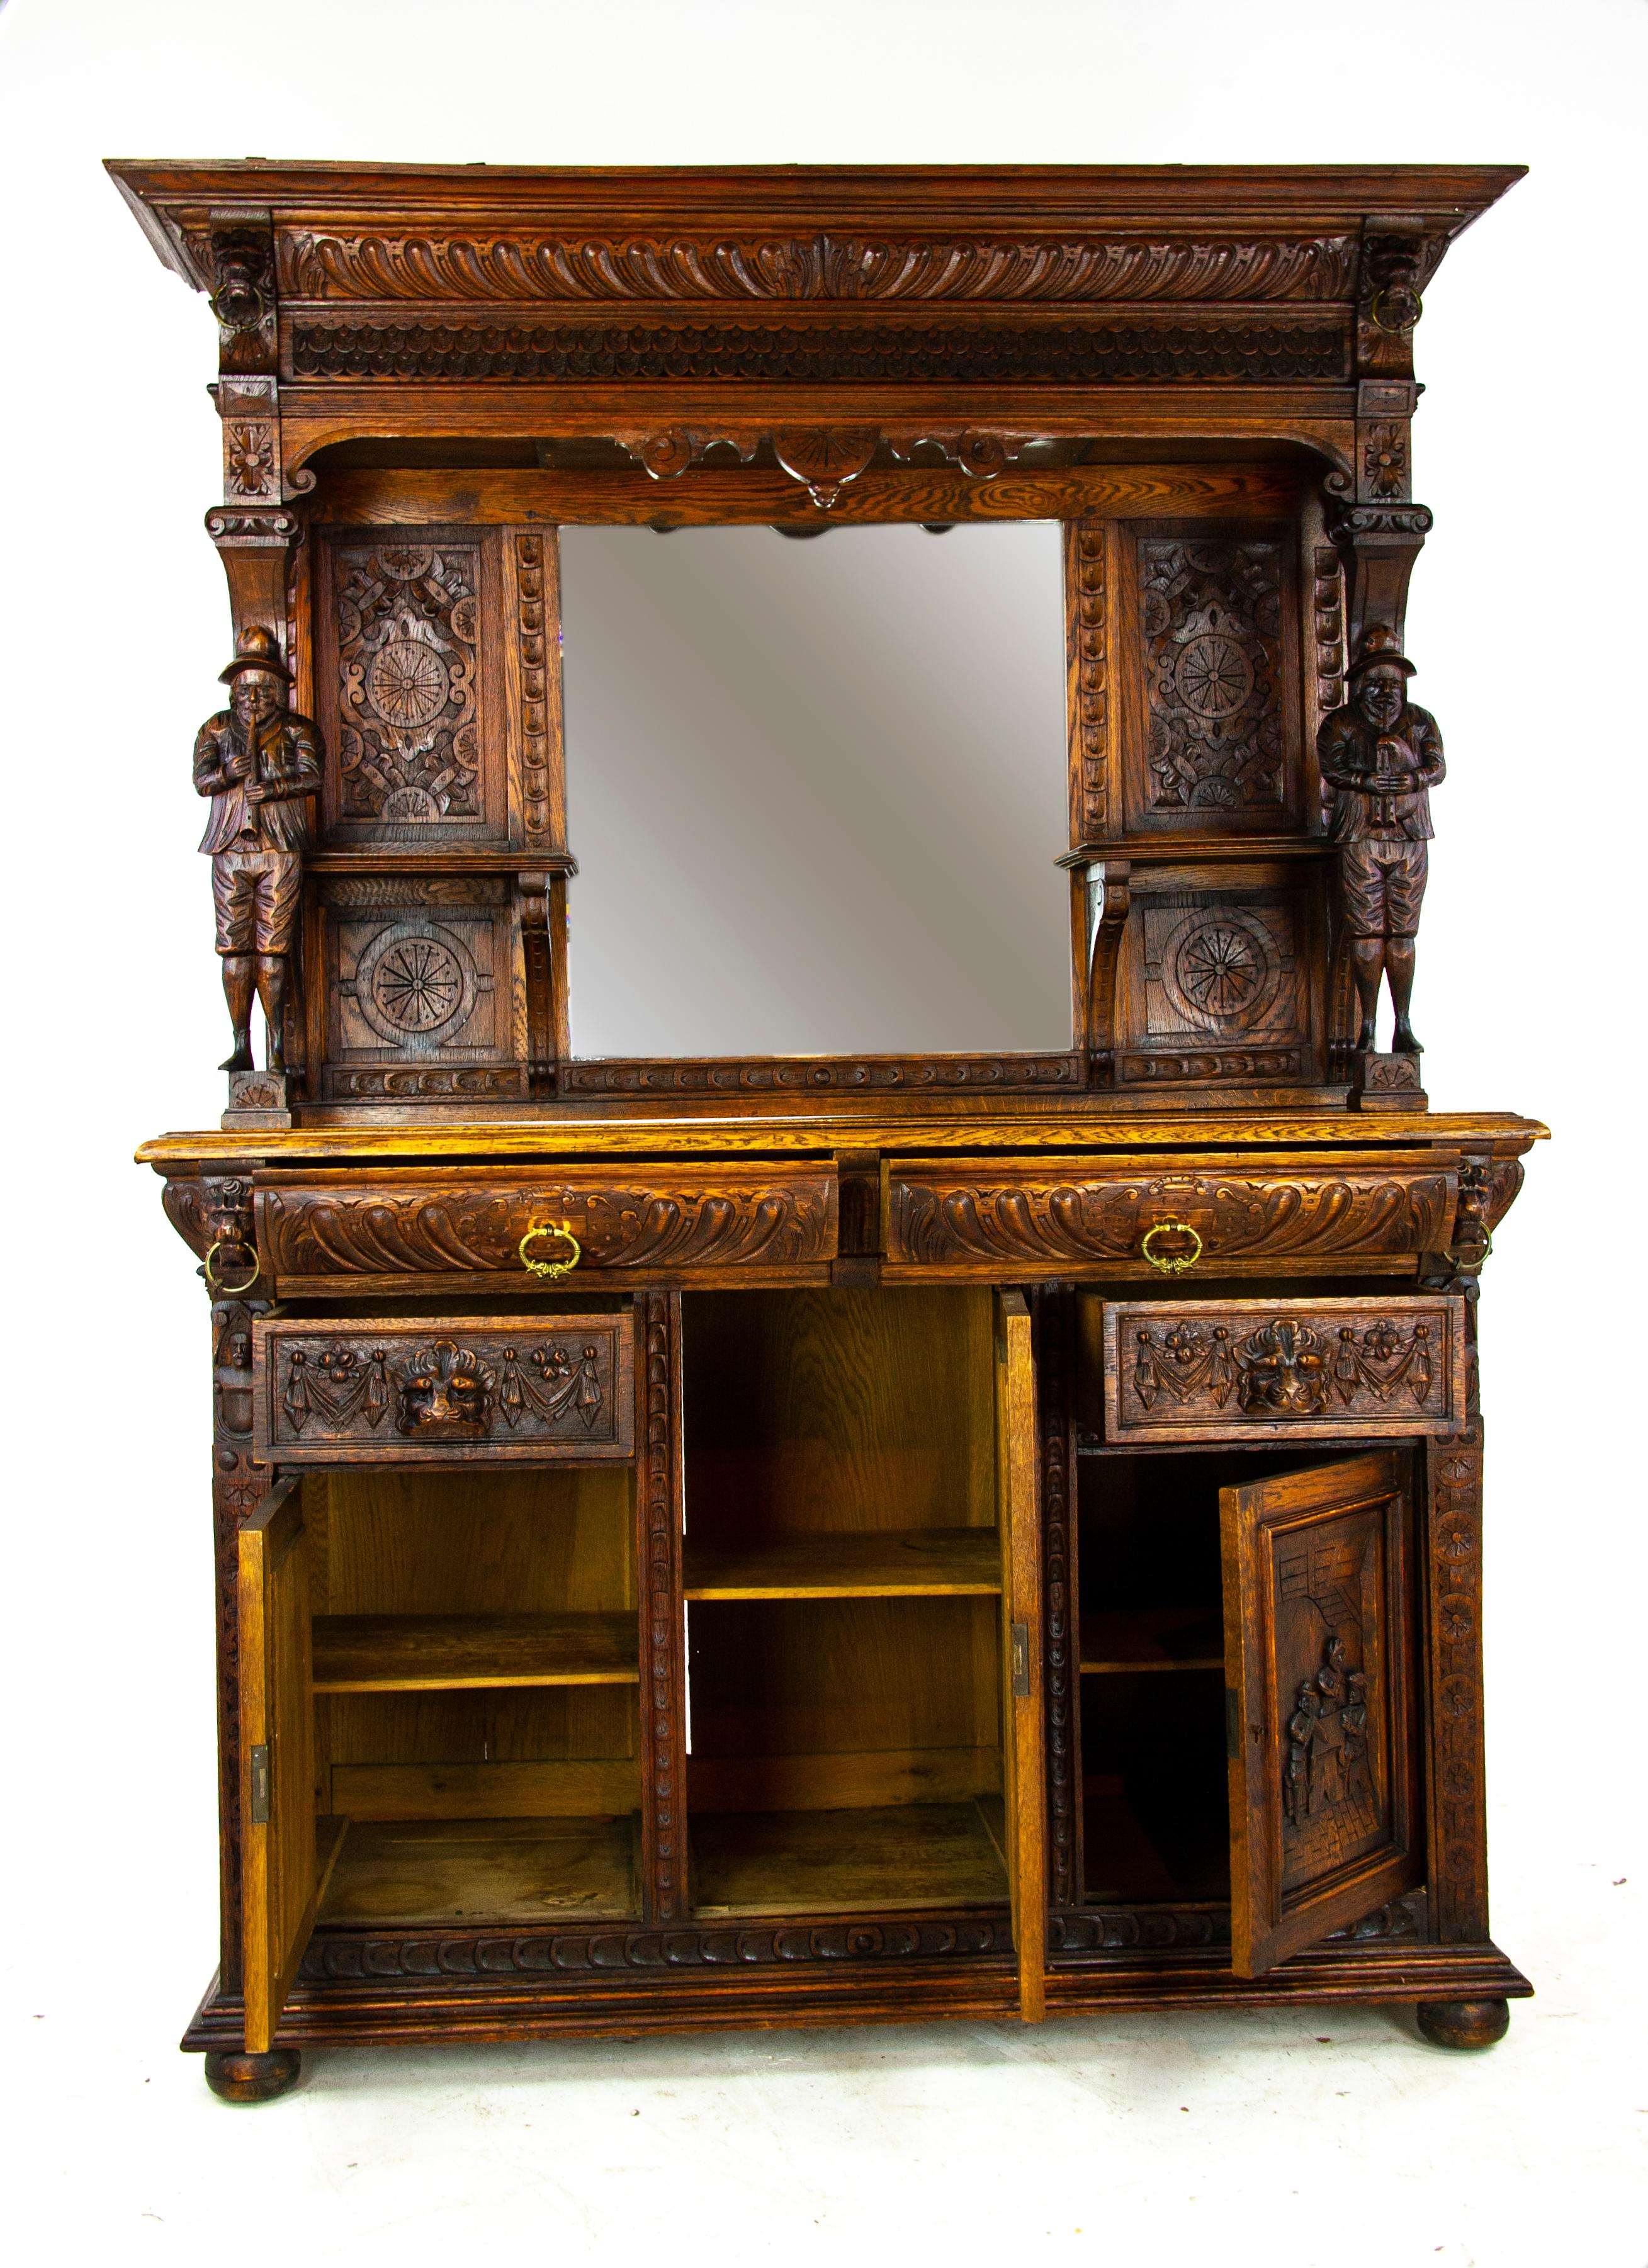 Antique oak sideboard, carved oak sideboard, Anglo-Flemish, antique furniture, Scotland, 1880, b1498

Scotland 1880
Solid oak construction with original finish
Has a projecting carved moulded cornice over central mirror
Flanked by carved panels